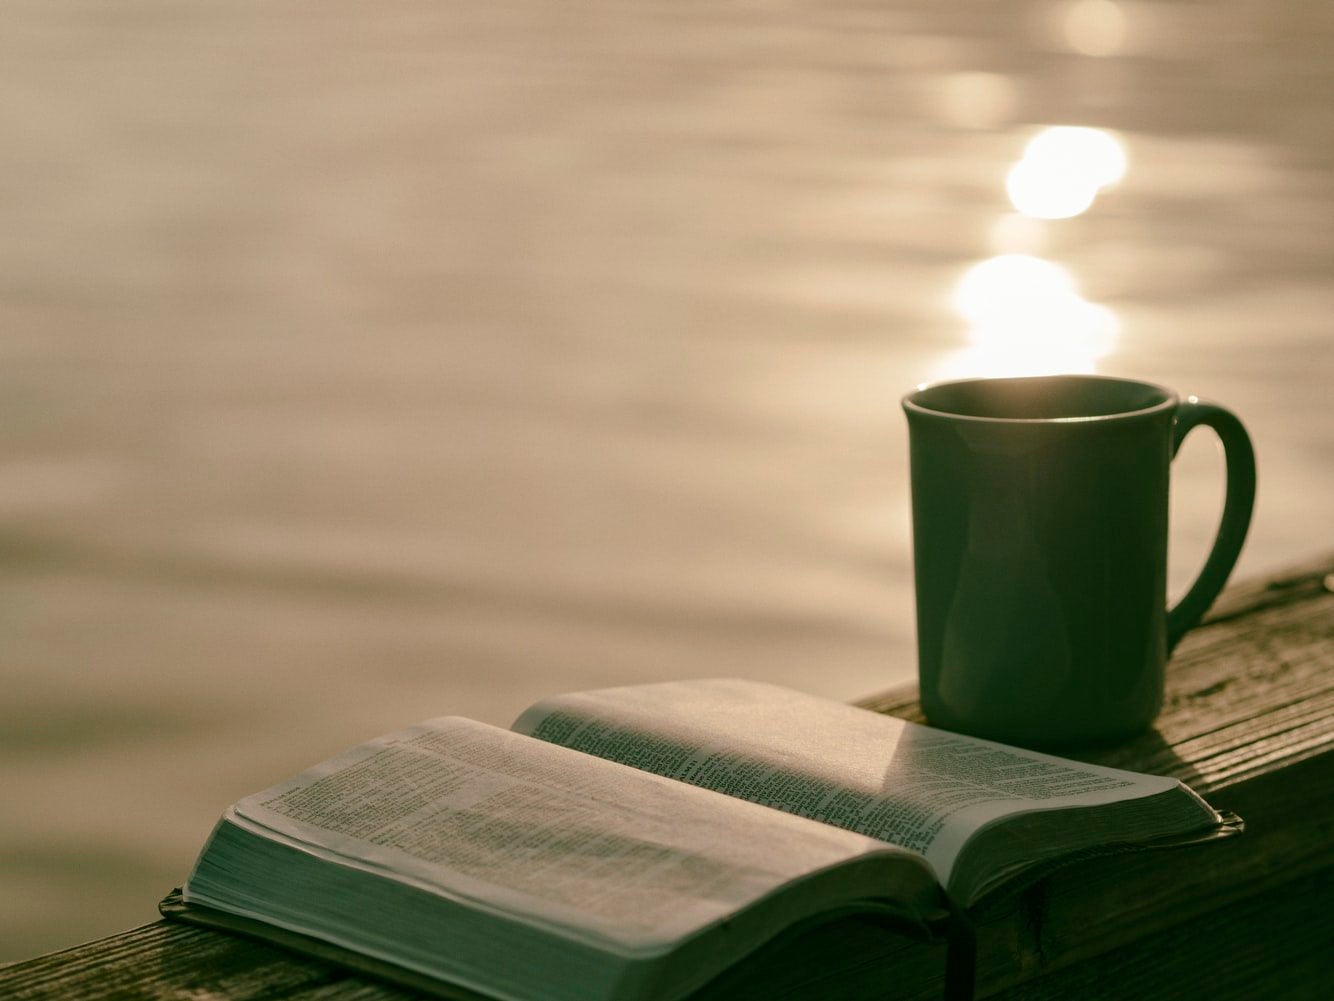 A green mug and a book overlooking the sunrise.